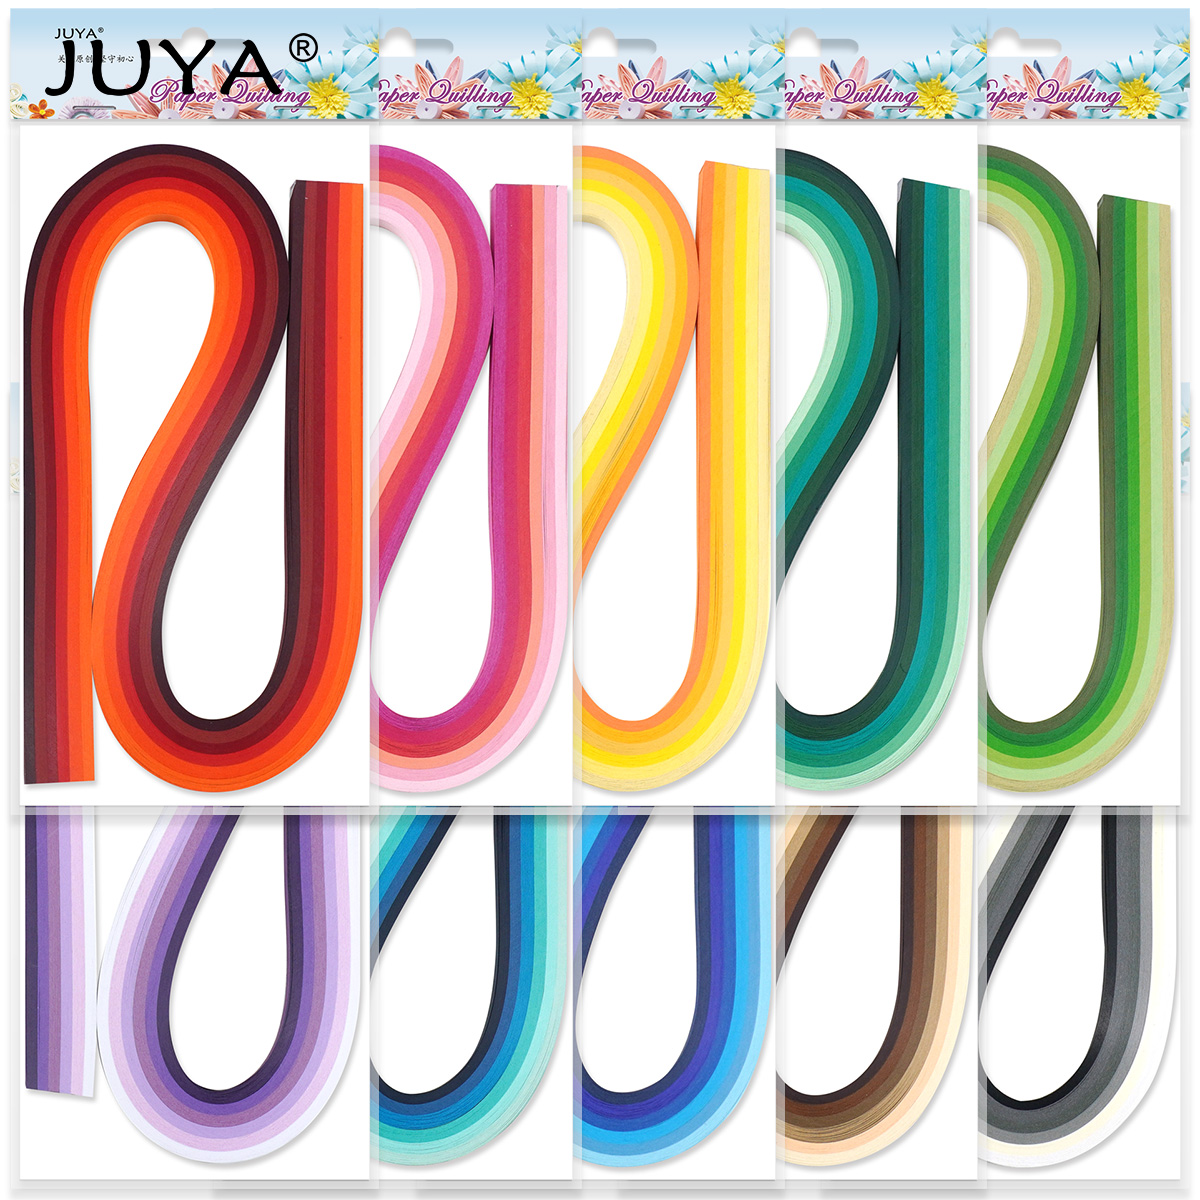 42 Colors, Width 7mm JUYA Paper Quilling Set 54cm Length Up to 42 Shade Colors 6 Packs